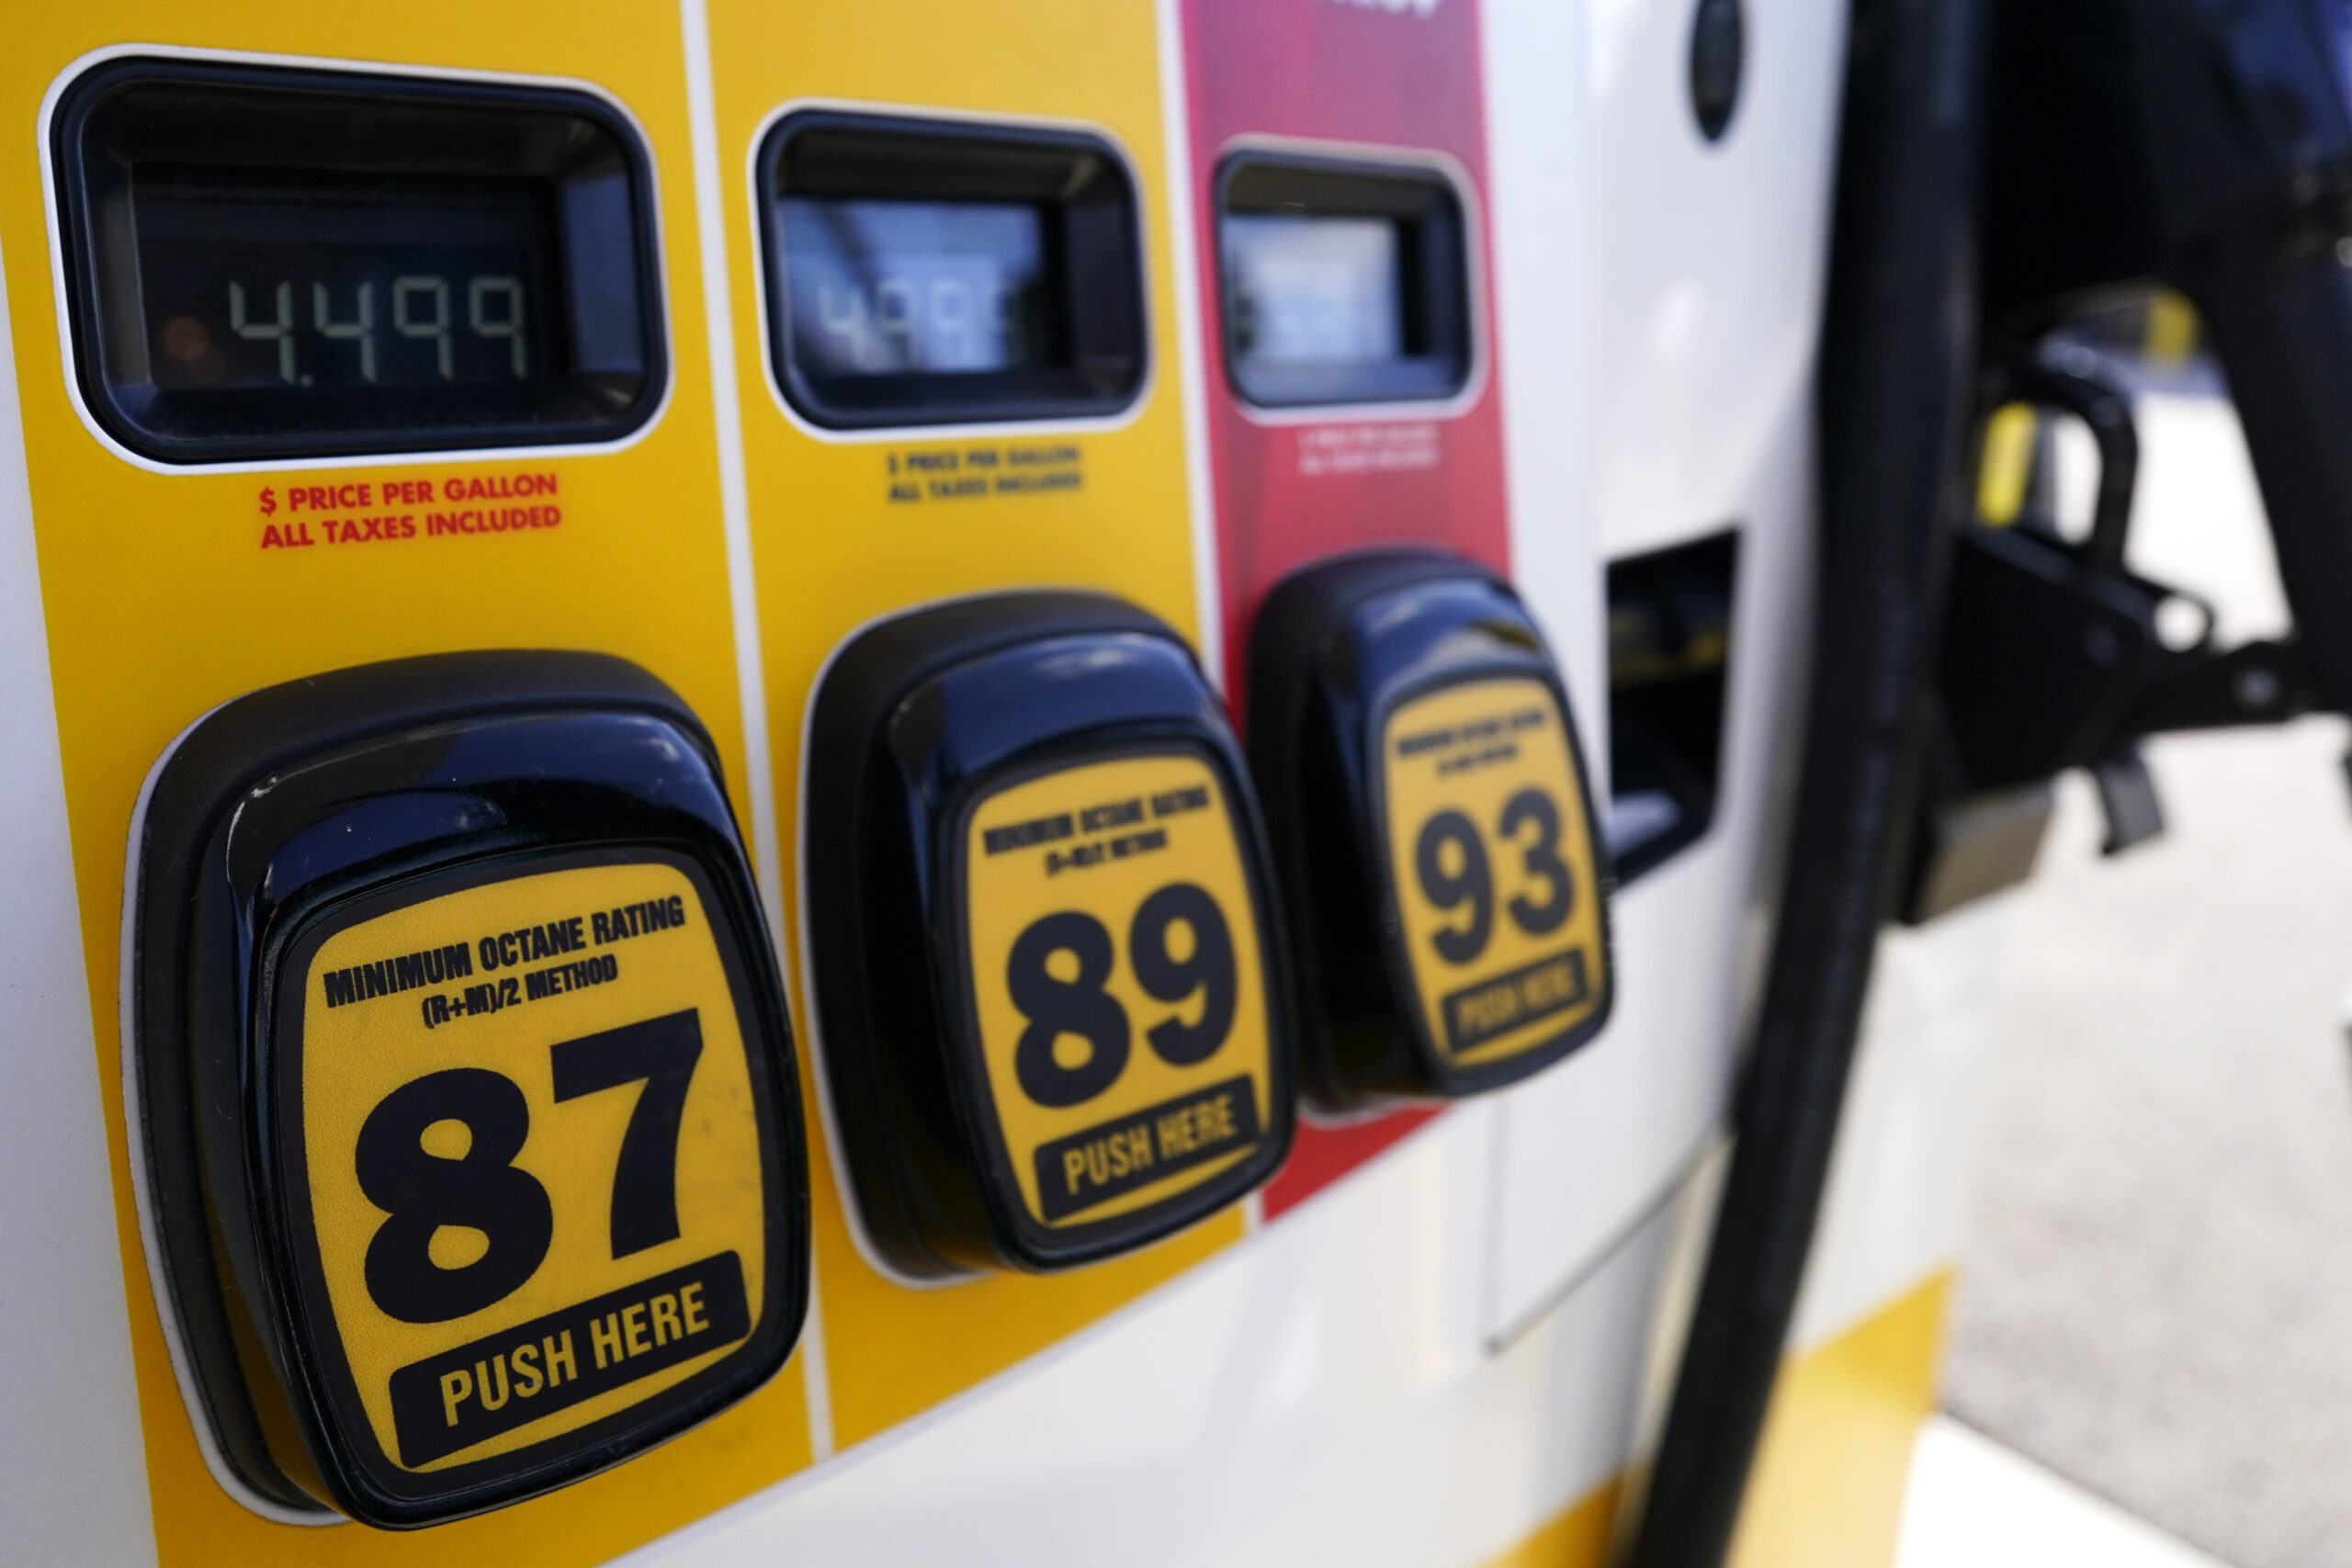 FILE - Gasoline prices are displayed at a gas station in Vernon Hills, Ill., Friday, April 1, 2022. The dollars-and-cents counter on the gas pump seems to be spinning faster these days with U.S. gasoline prices hitting another record high on Tuesday, May 10. (AP Photo/Nam Y. Huh, File)